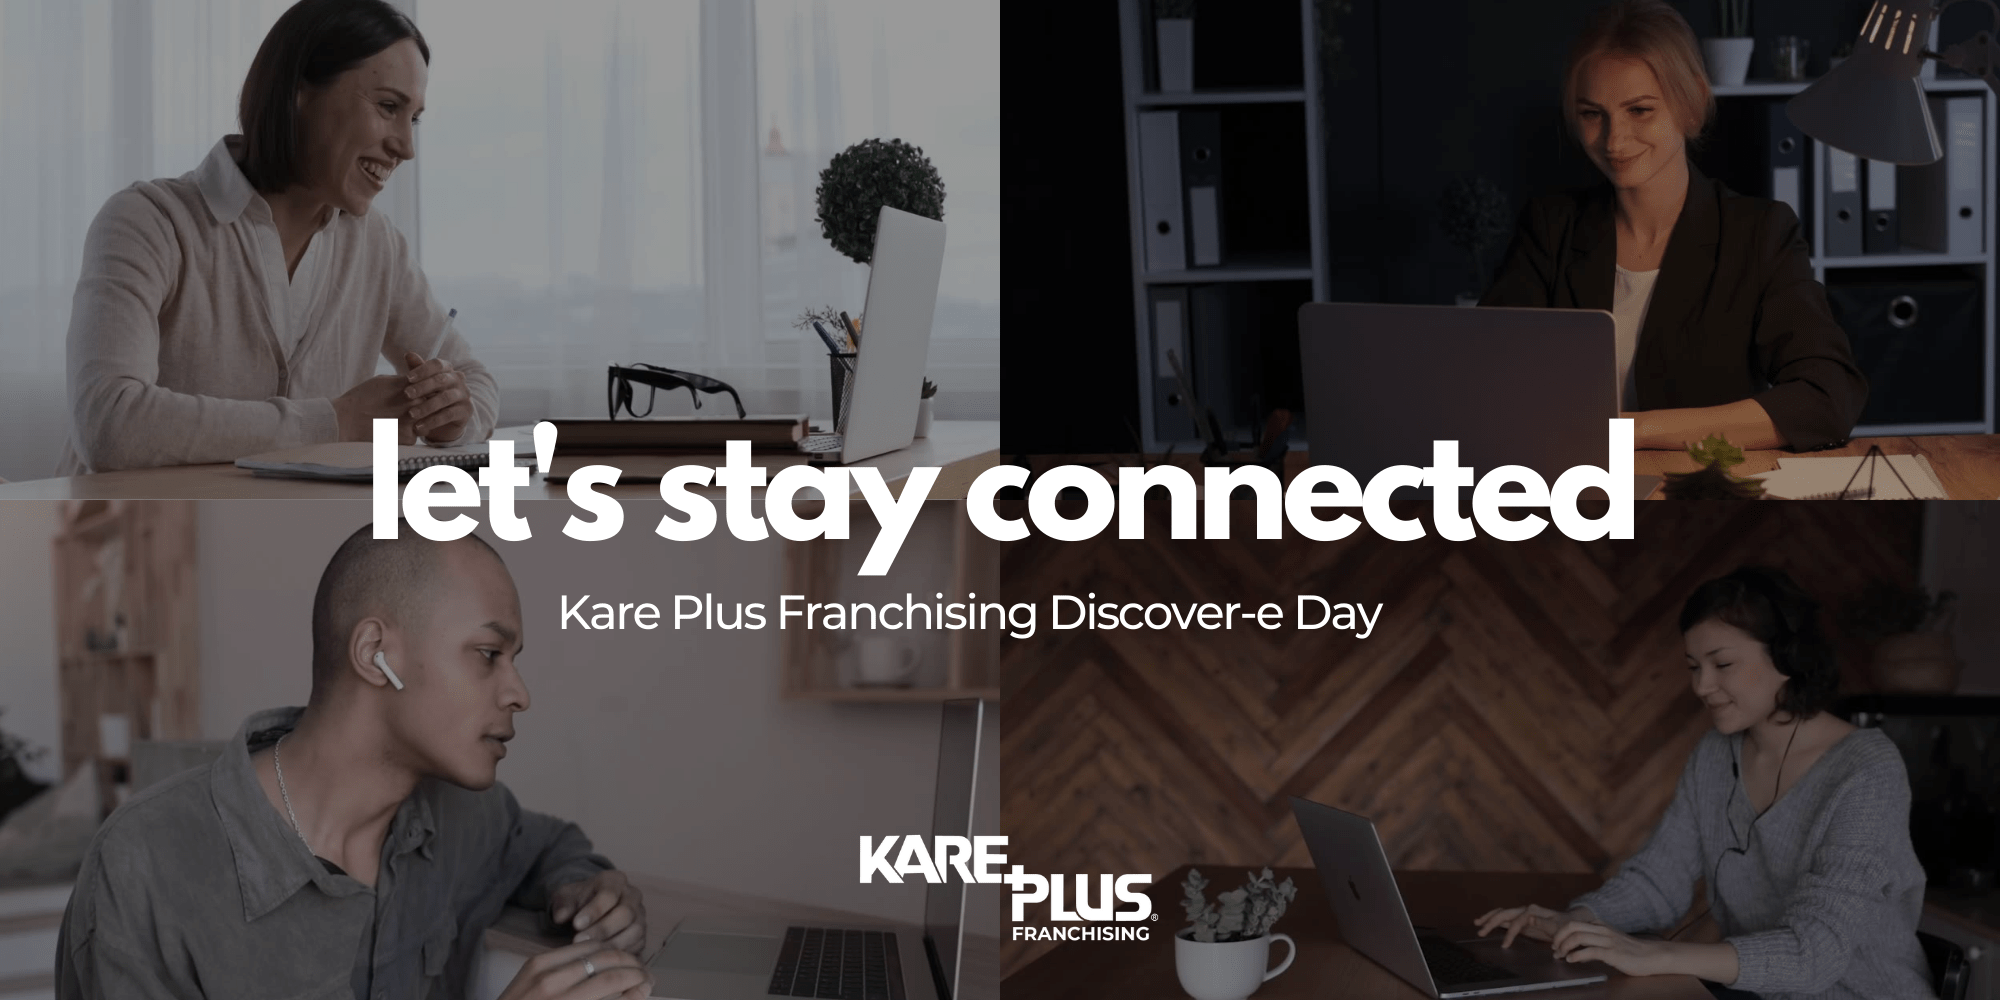 Kare Plus Launches Franchising Discover-e Day